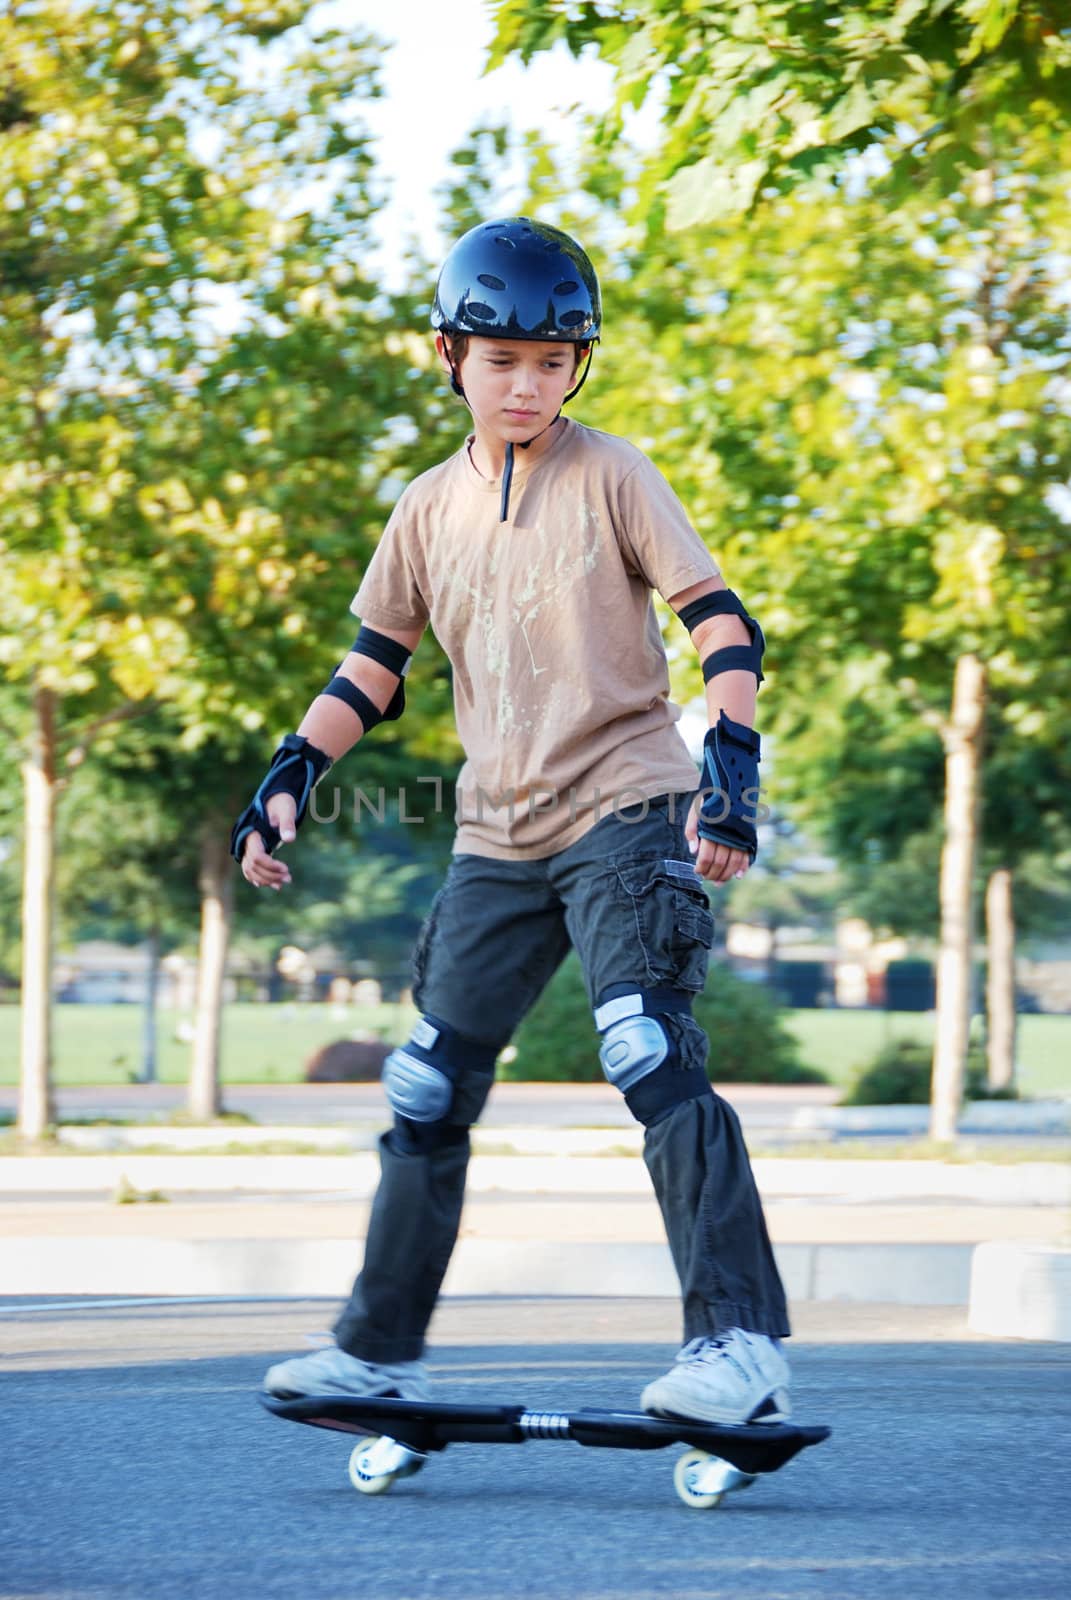 Teenage boy riding a skateboard in a parking lot with trees in the background on a sunny day.